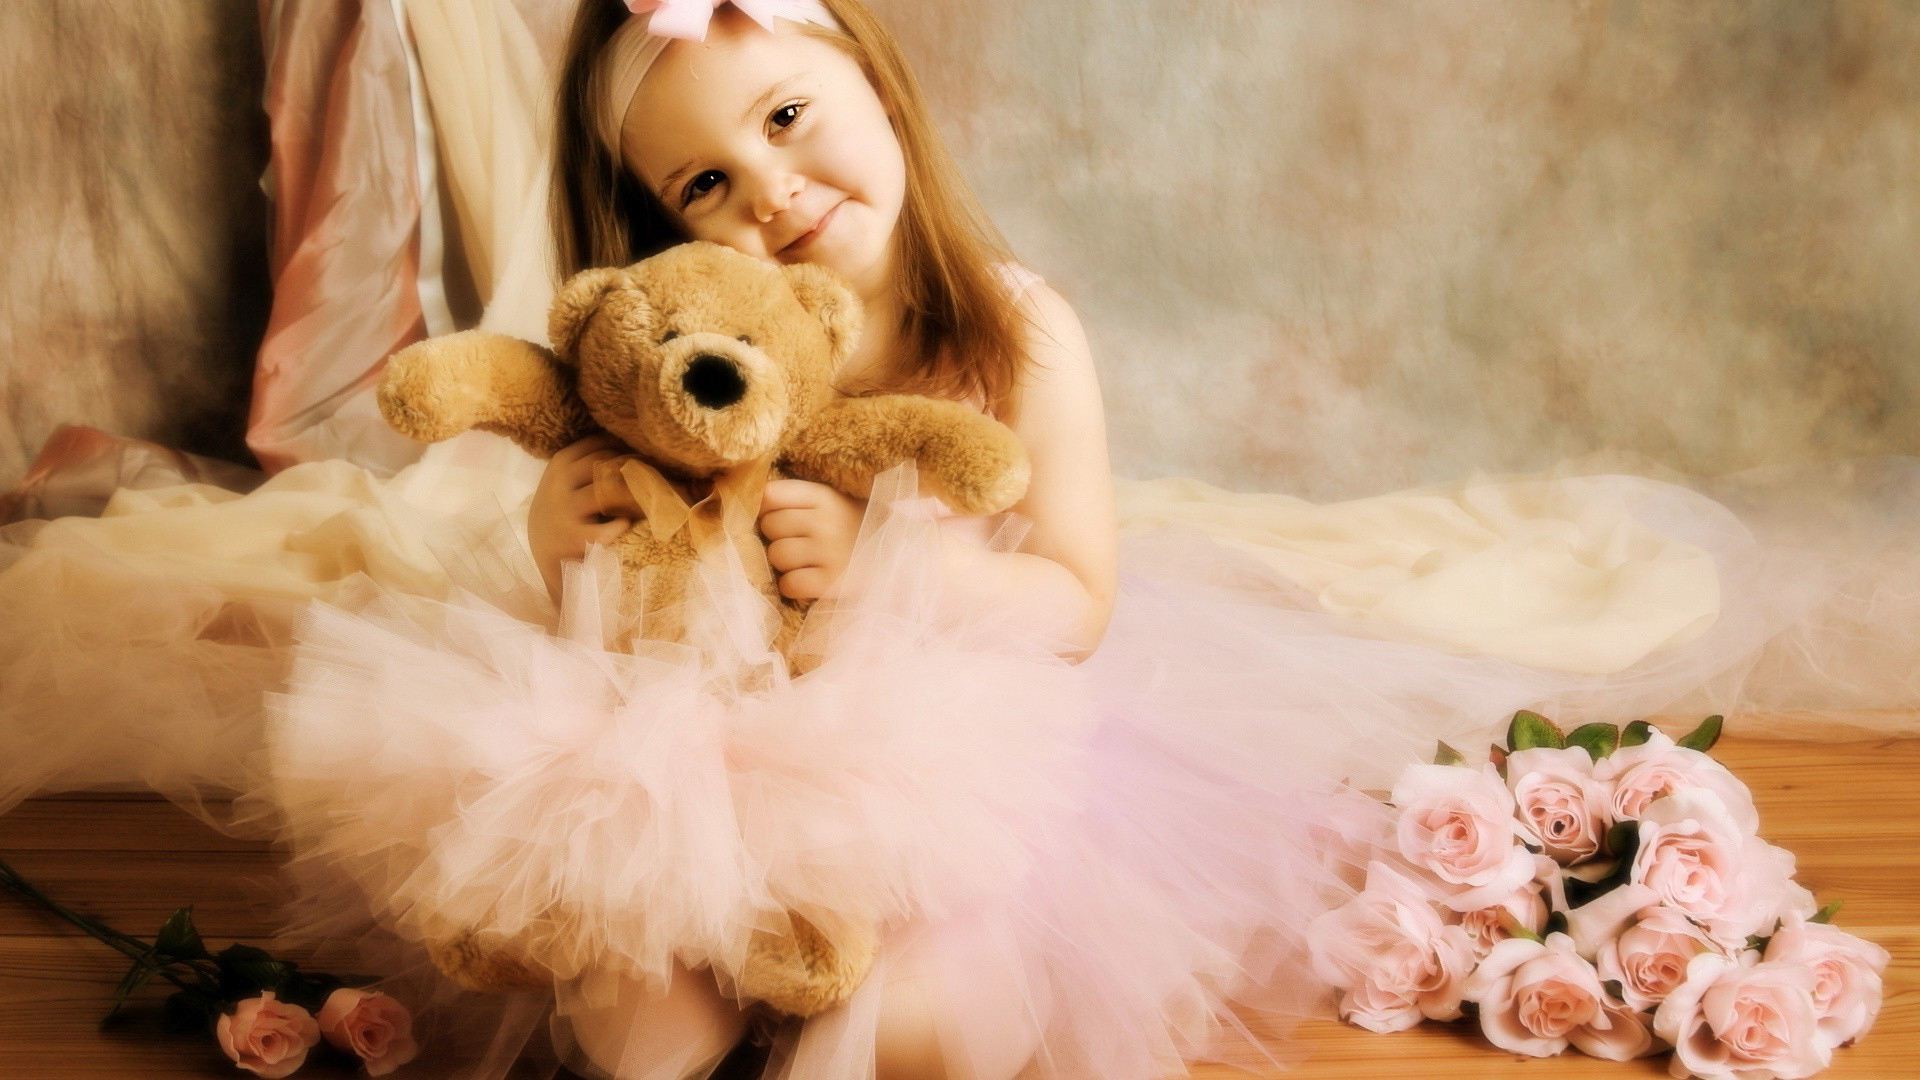 Beautiful Girls Amp Cute Babies With Teddy Bear Hd Wallpapers Special Days Pics Story 1920x1080